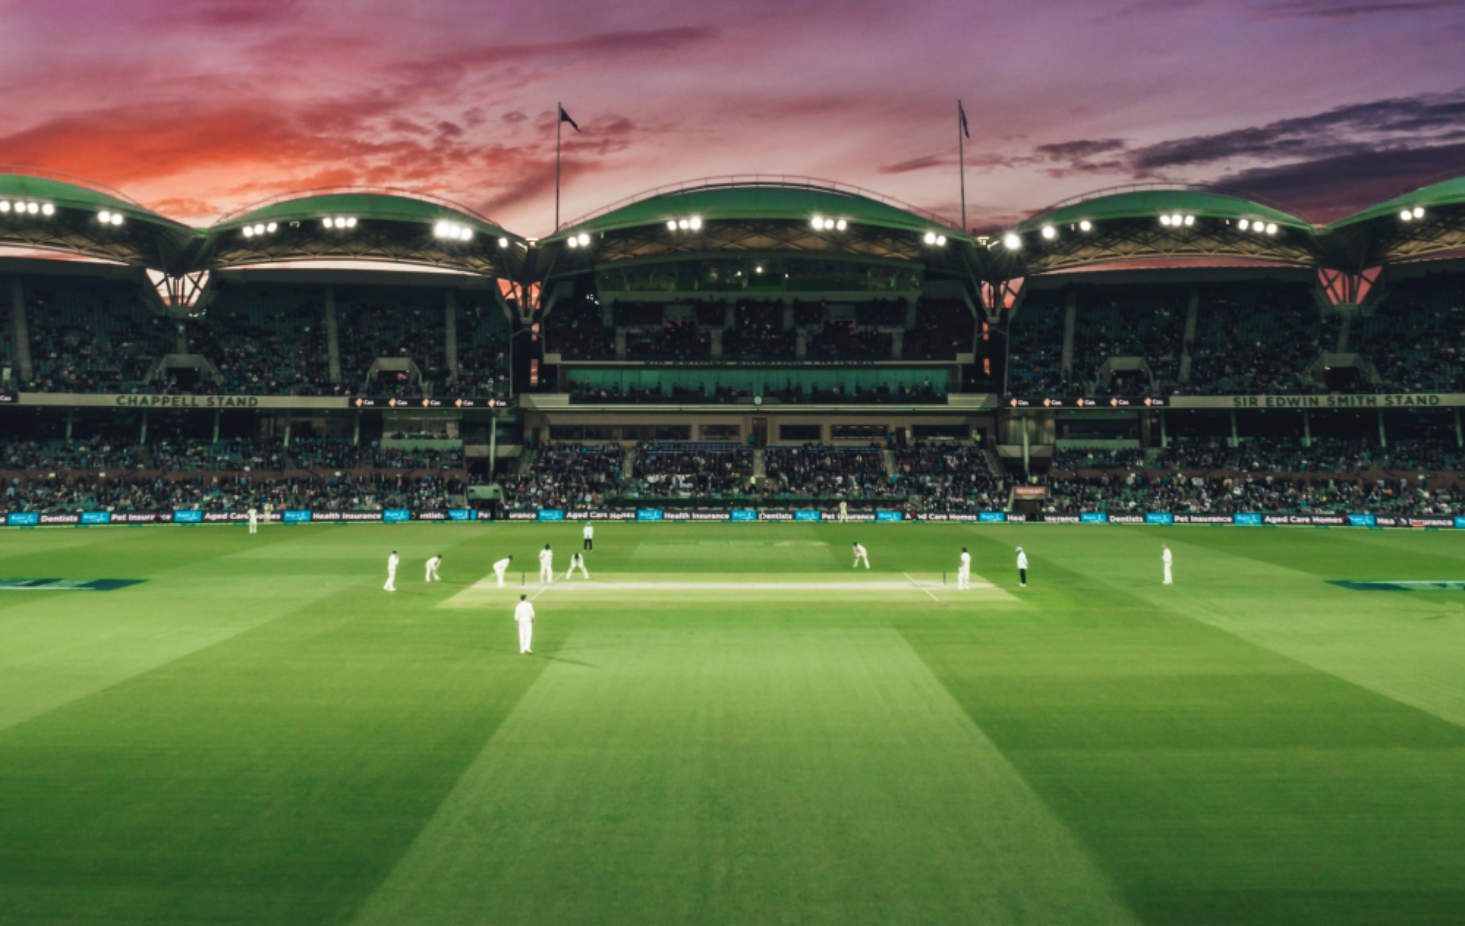 The Best Cricket Tours and Travel Packages for Fans